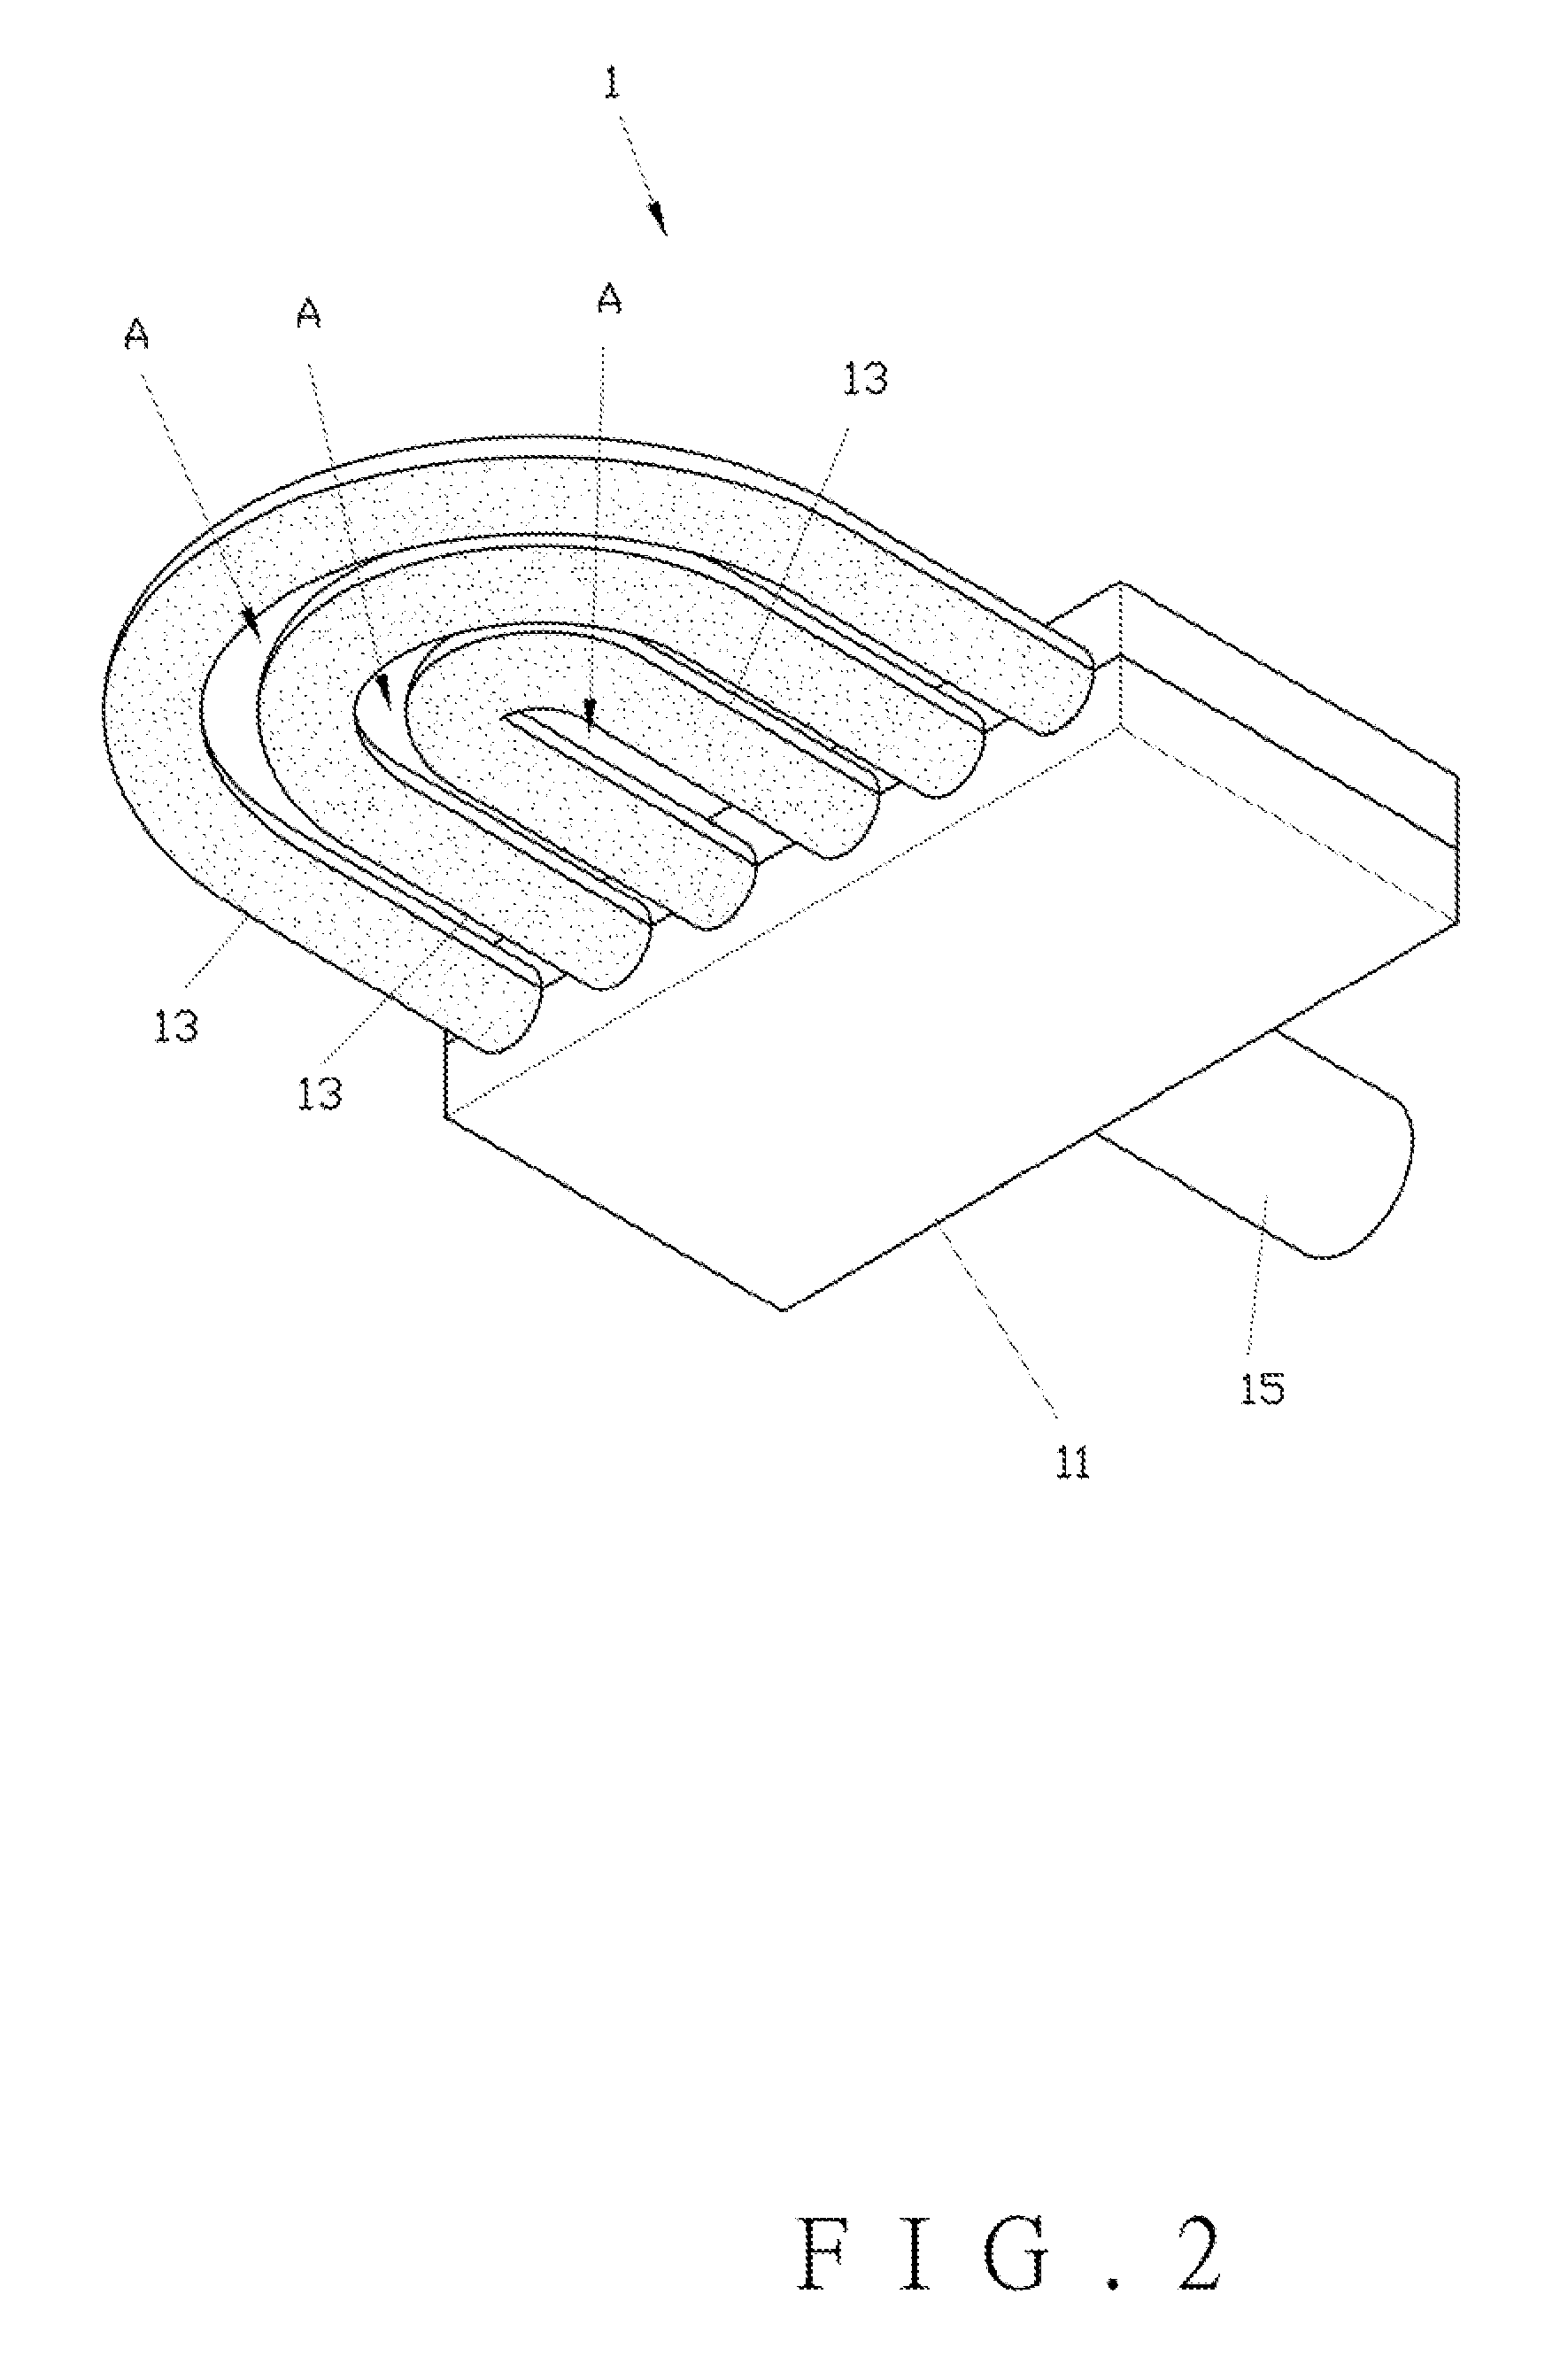 Light-emitting diode road lamp structure